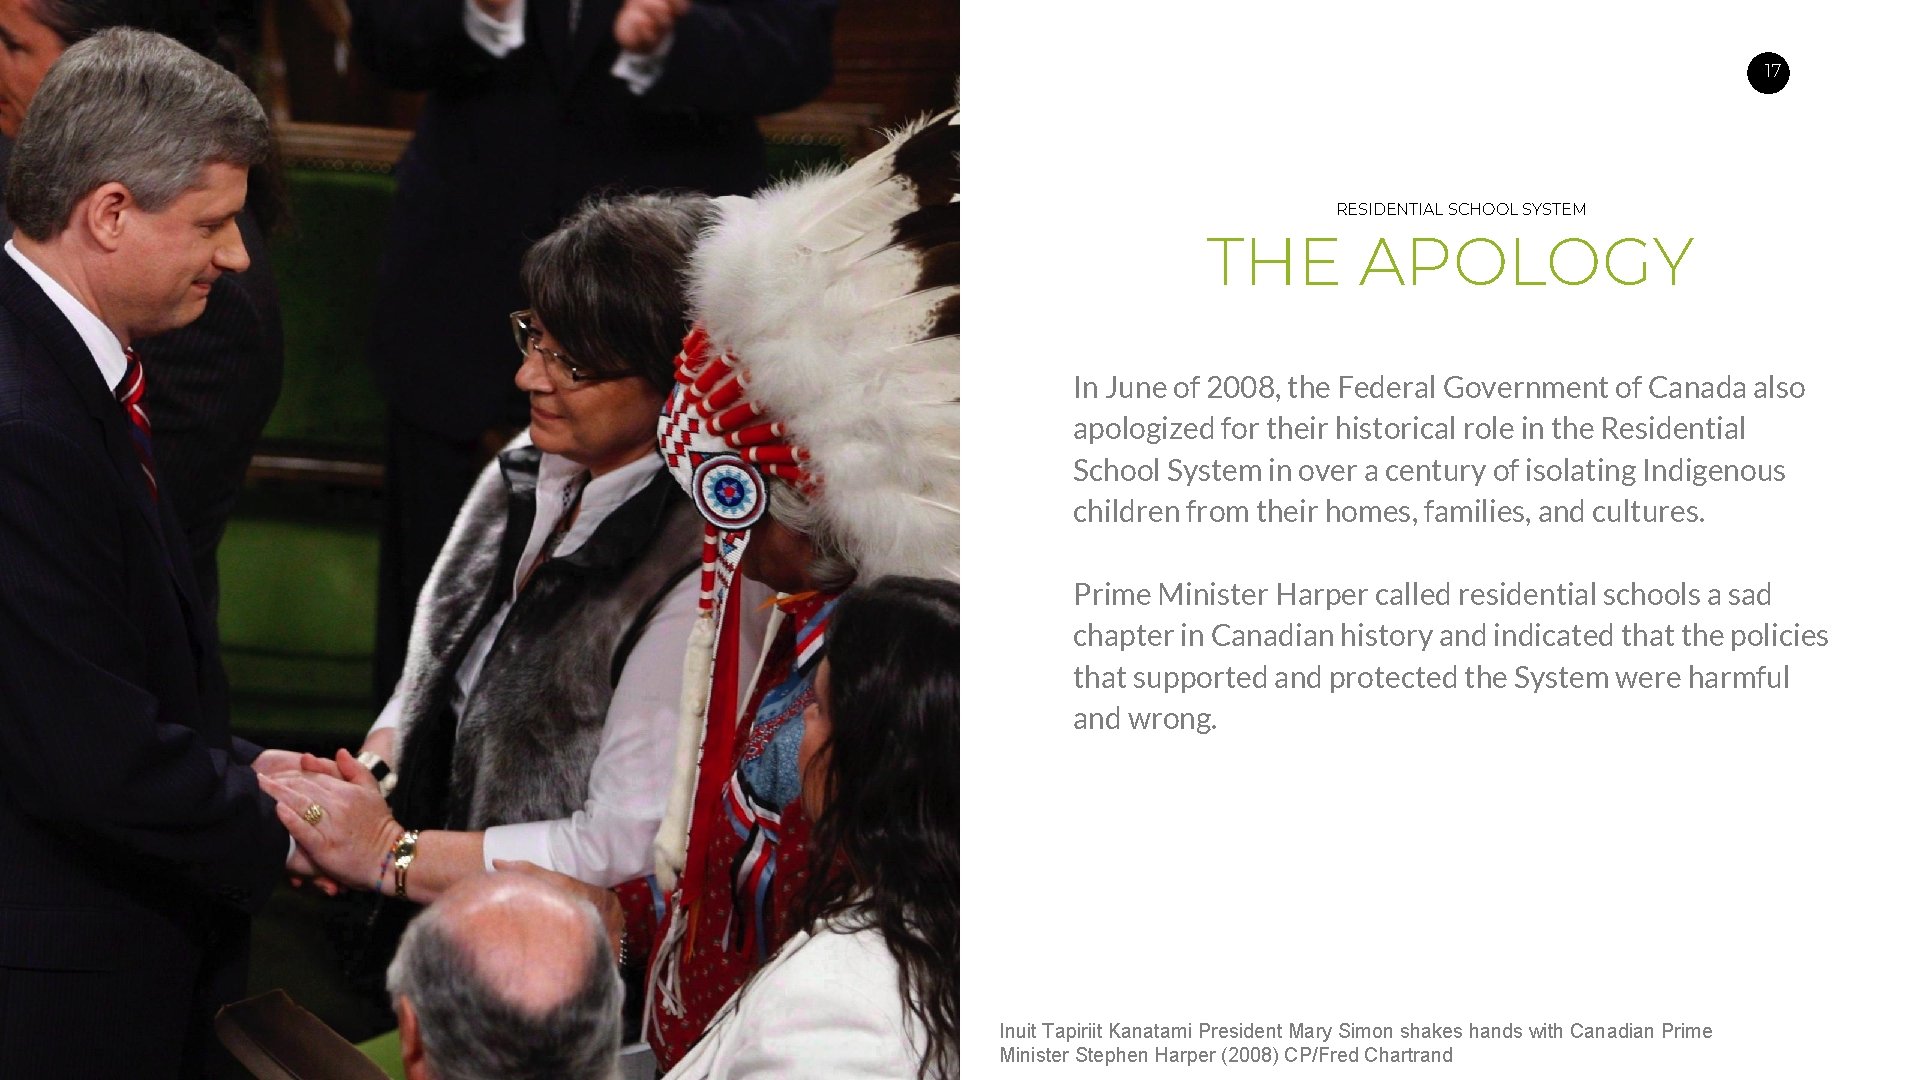 17 RESIDENTIAL SCHOOL SYSTEM THE APOLOGY In June of 2008, the Federal Government of